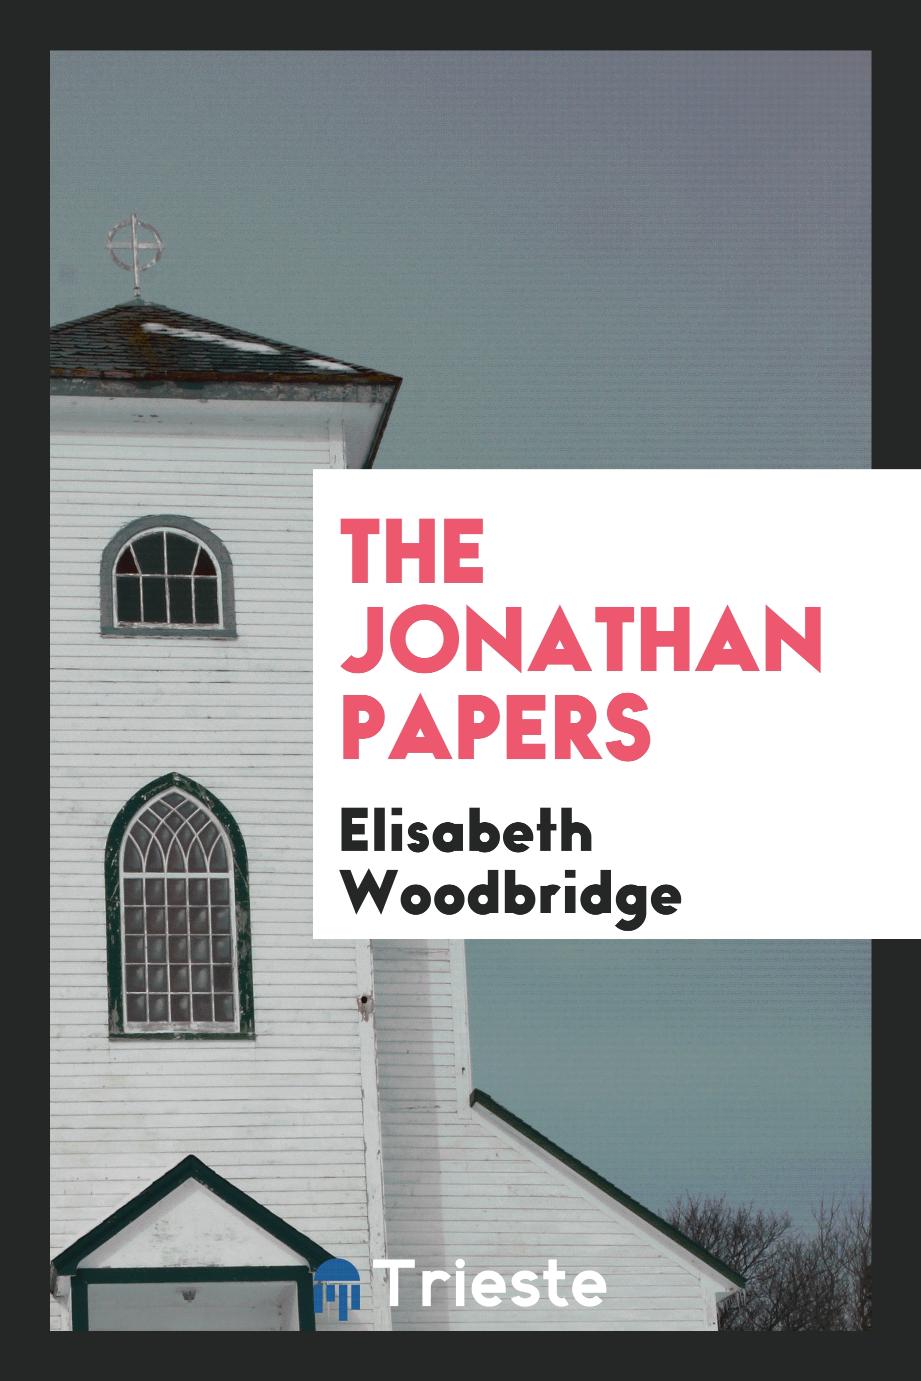 The Jonathan papers